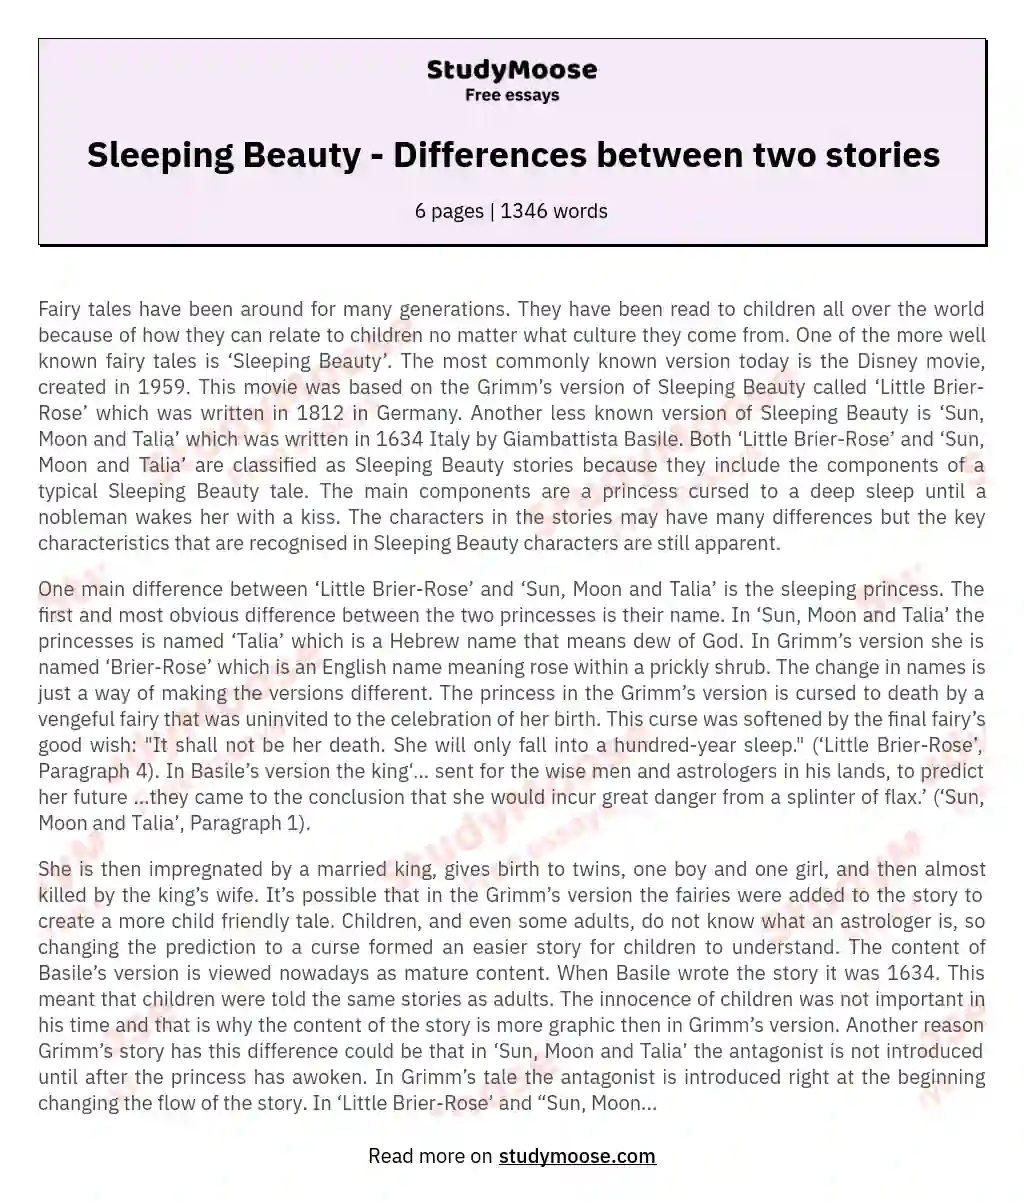 Sleeping Beauty - Differences between two stories